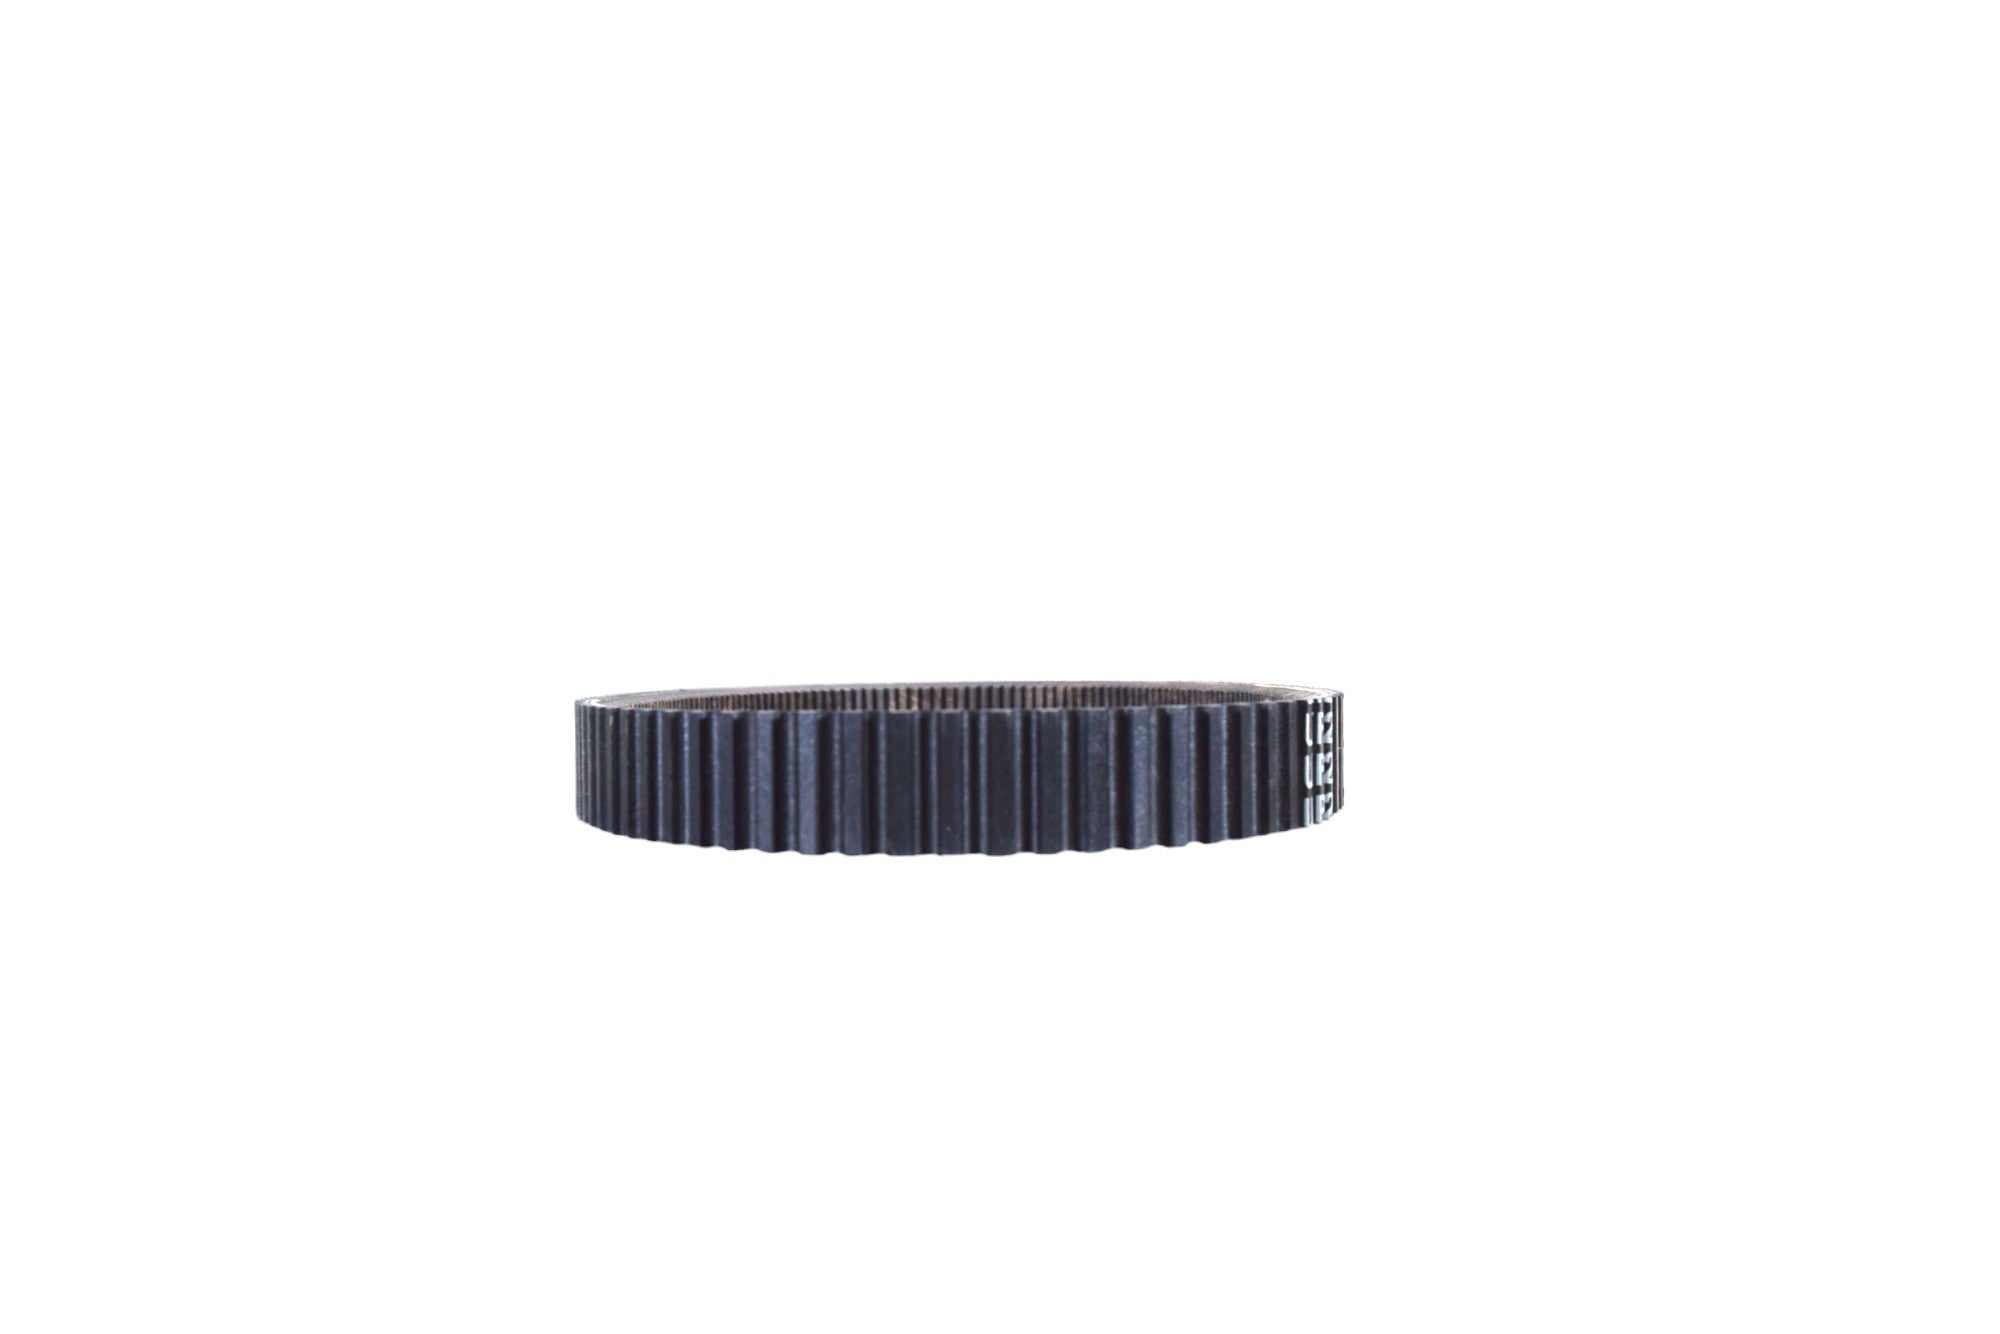 Ultimax UXP426 Drive Belt for Polaris Sportsman, ACE, and RZR OEM Replacement for 3211113, 3211116 (Made in USA)